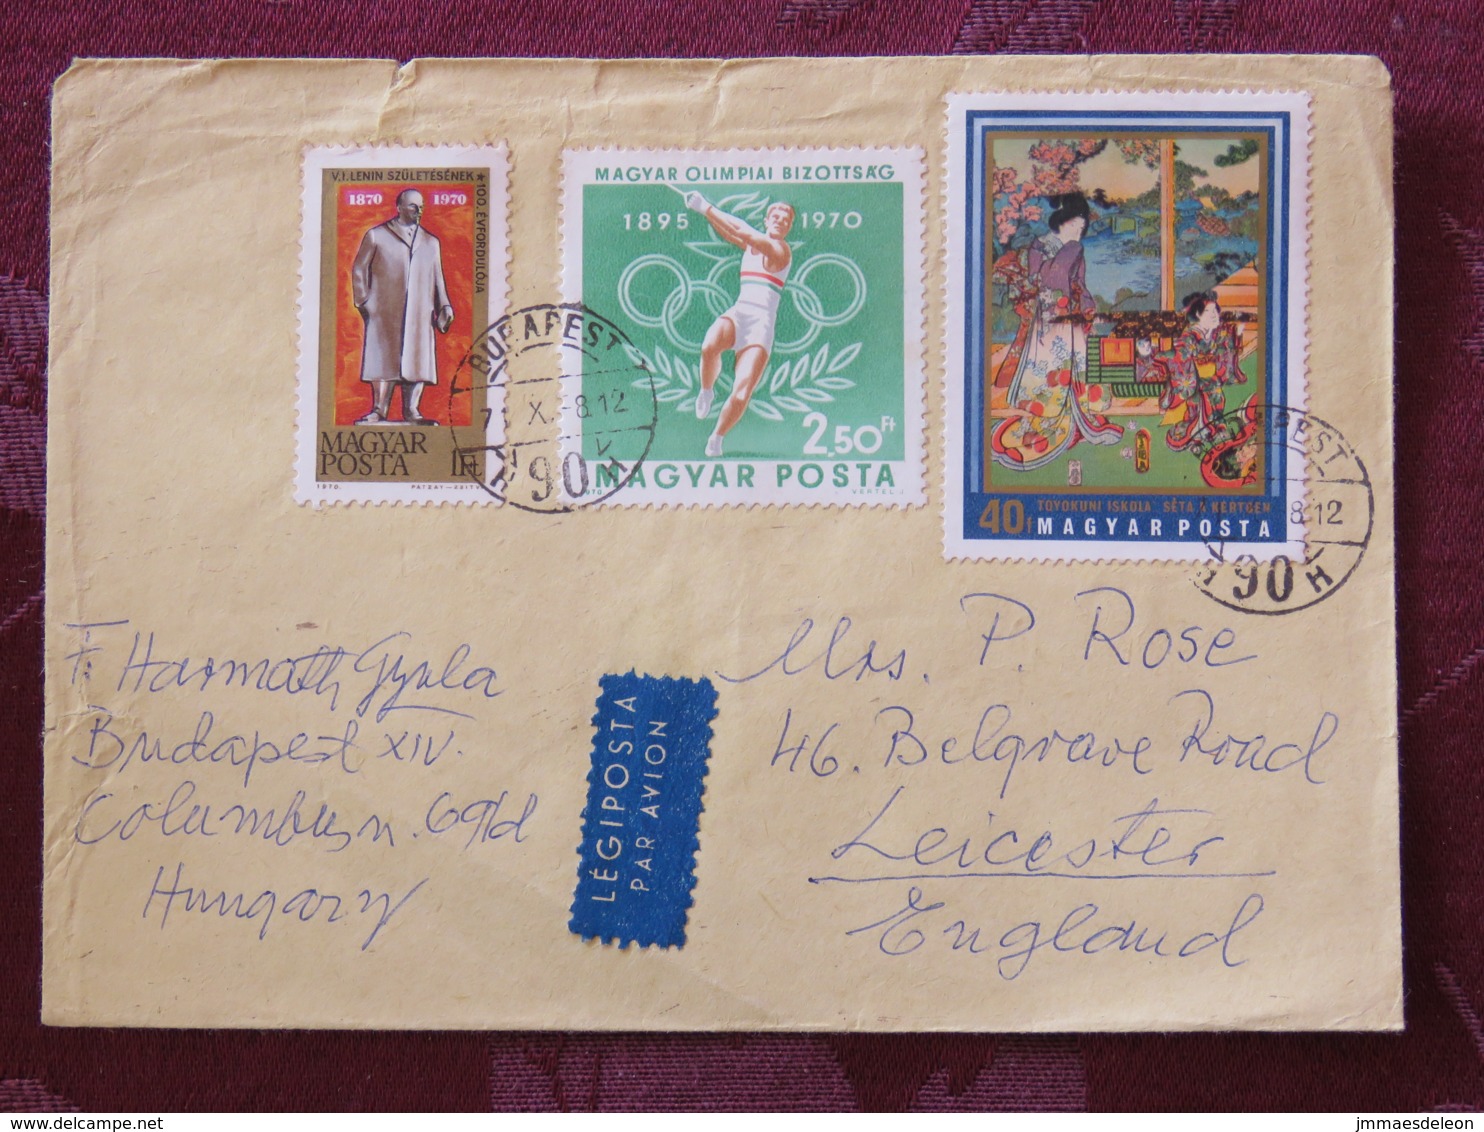 Hungary 1971 Cover Budapest To England - Lenin - Japanese Painting - Olympic Games Hammer Throwing - Covers & Documents